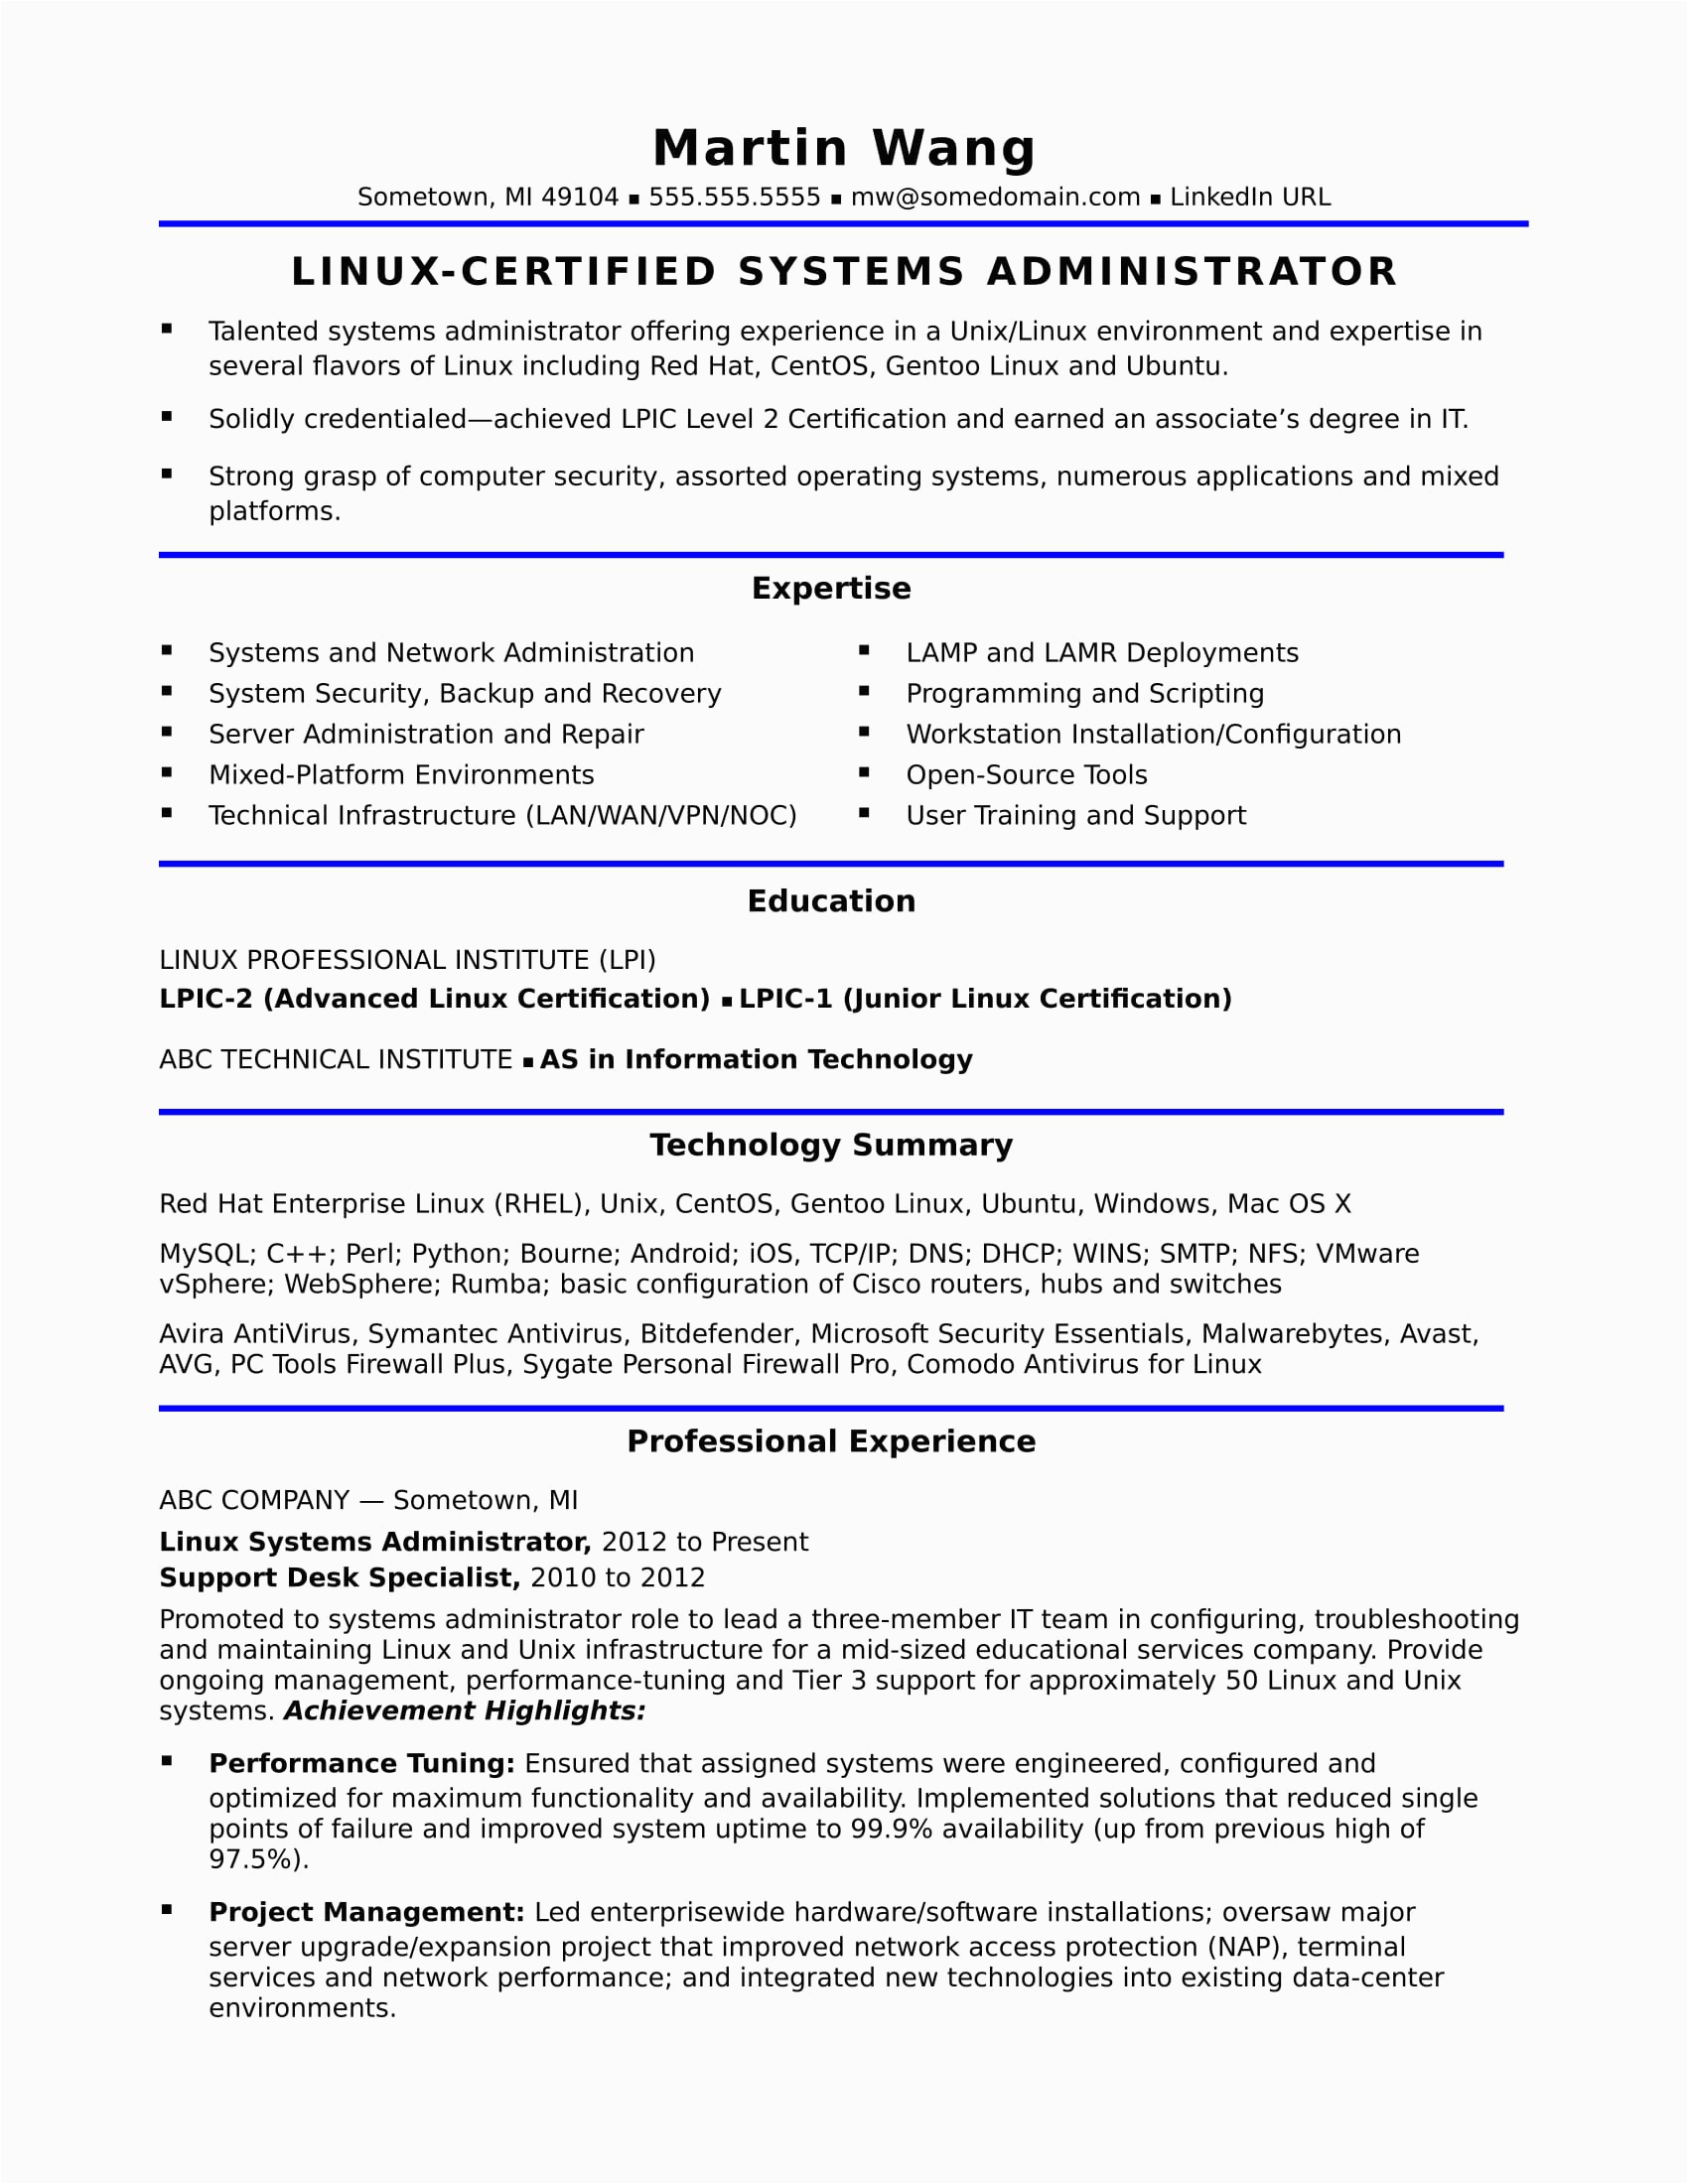 Windows System Administrator Sample Resume Free Download Sample Resume for A Midlevel Systems Administrator